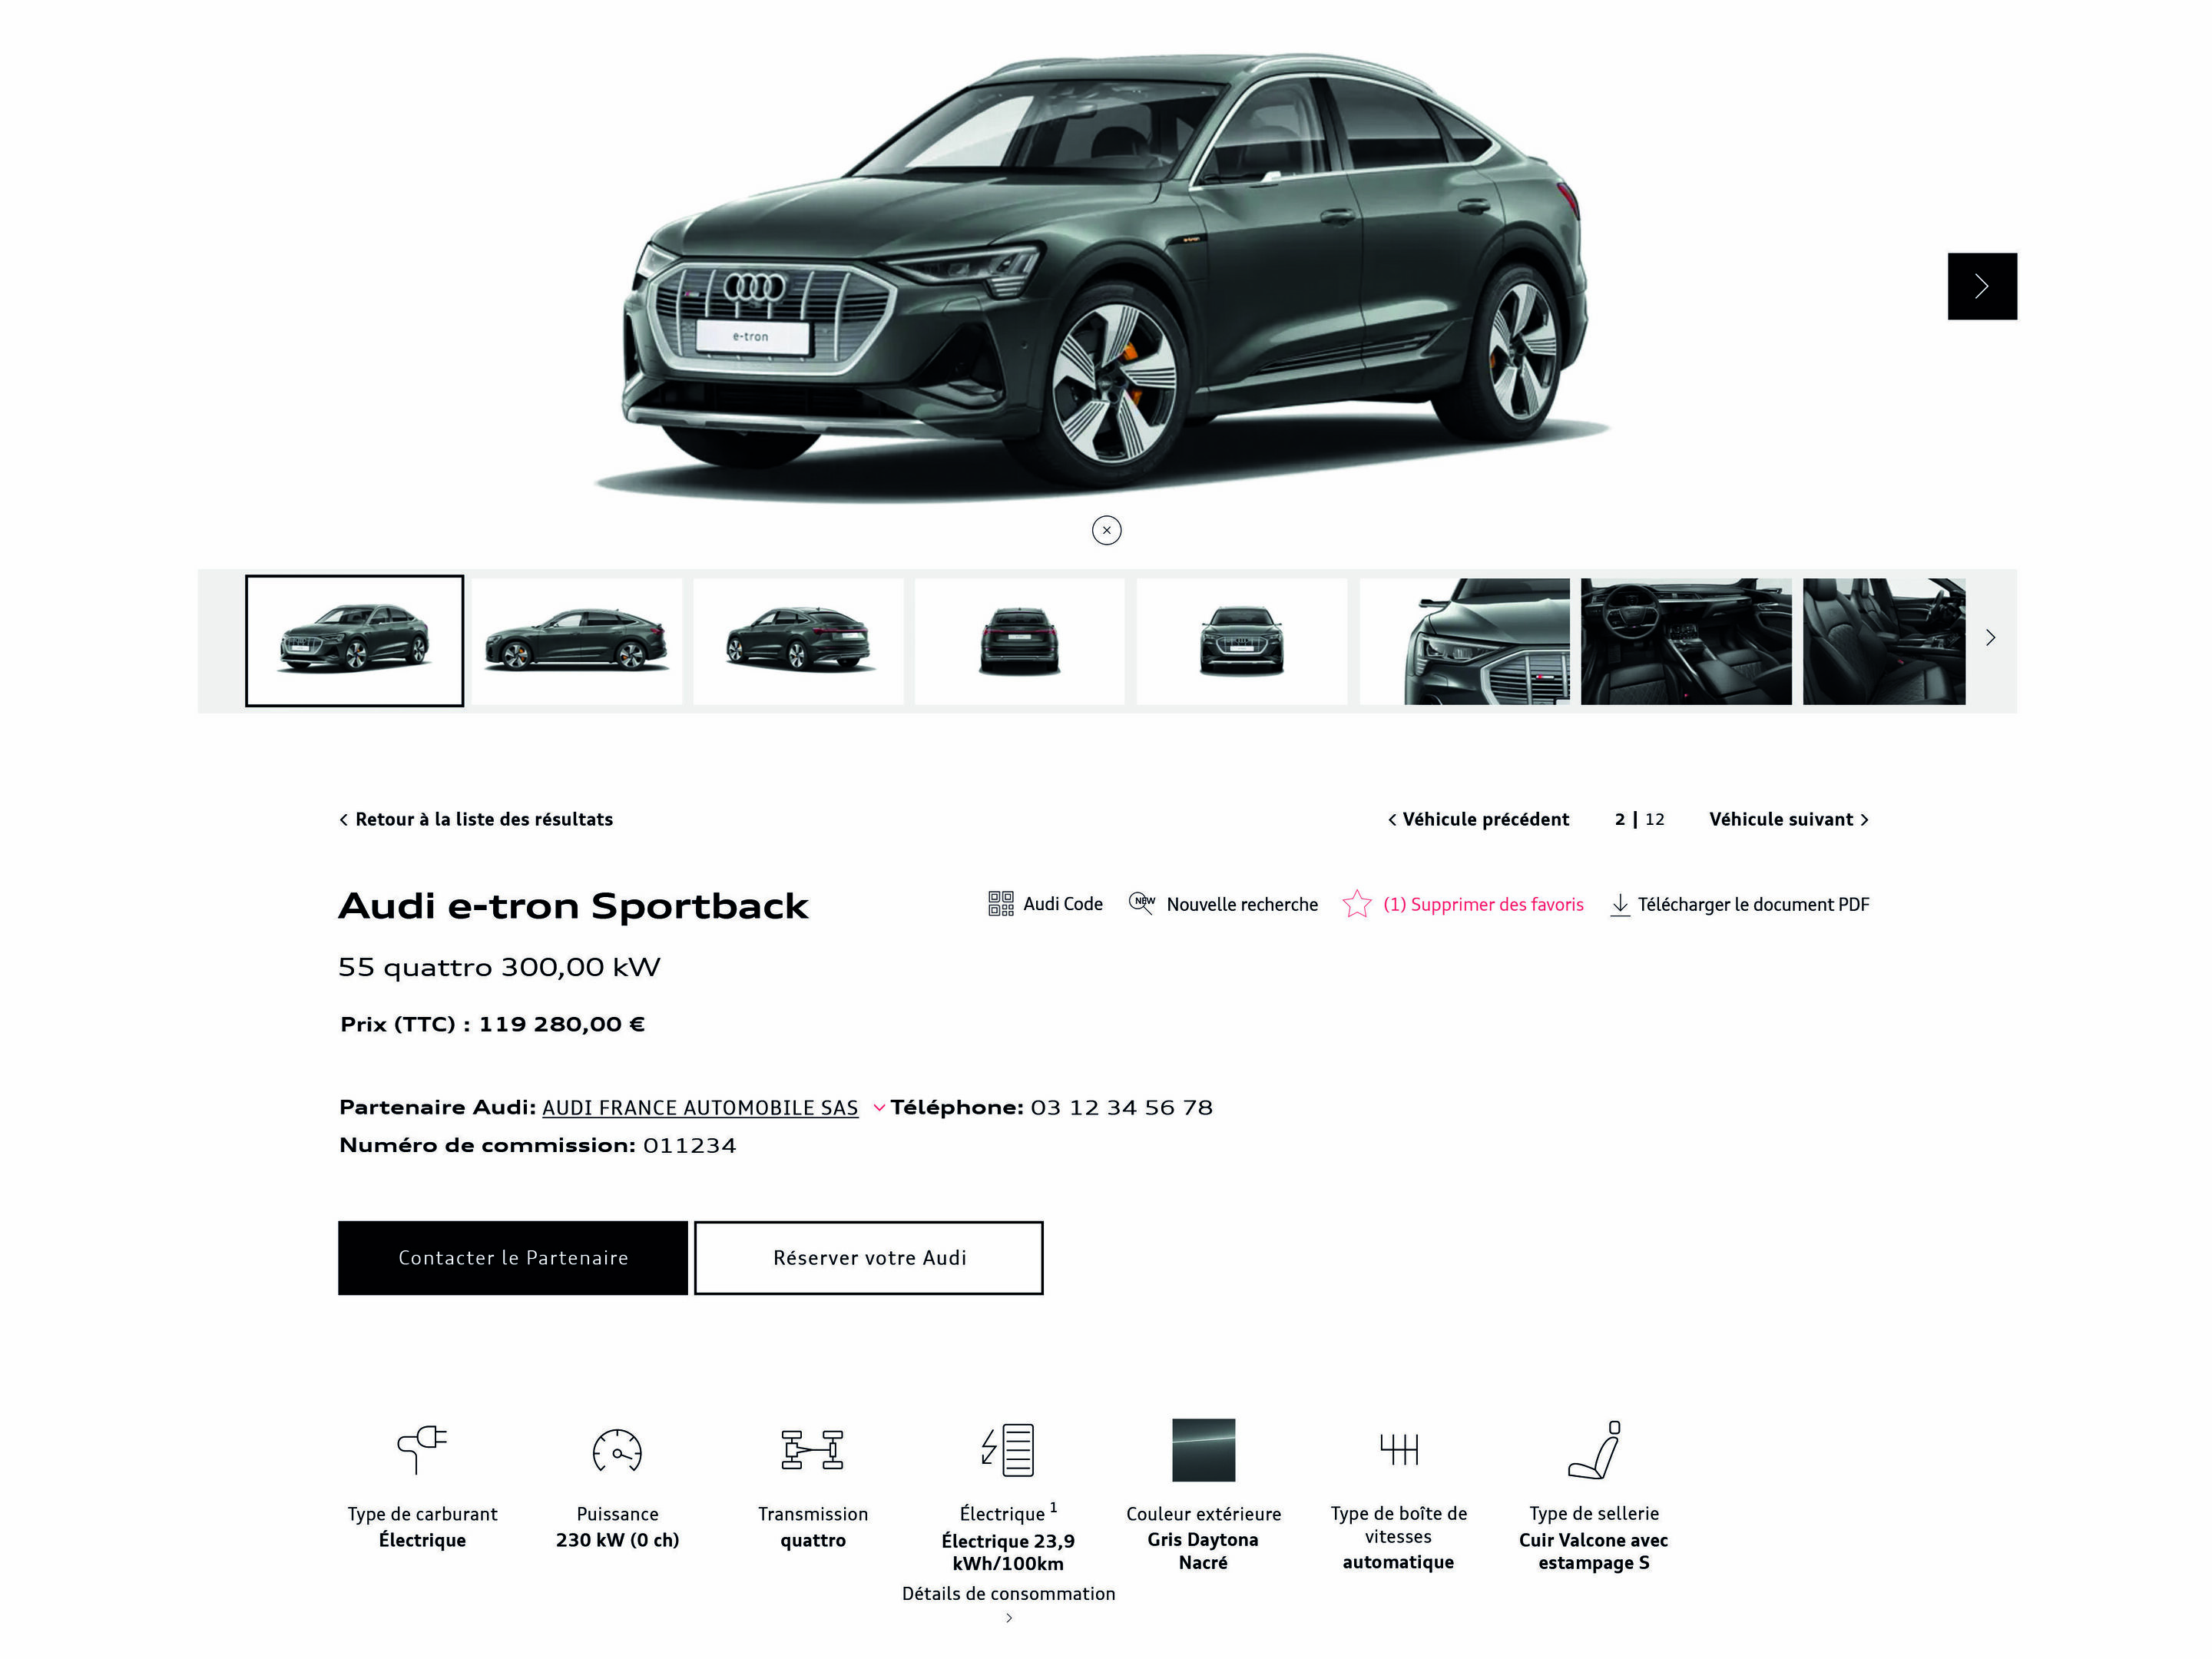 Audi further expands its e-commerce offerings together with retail partners worldwide